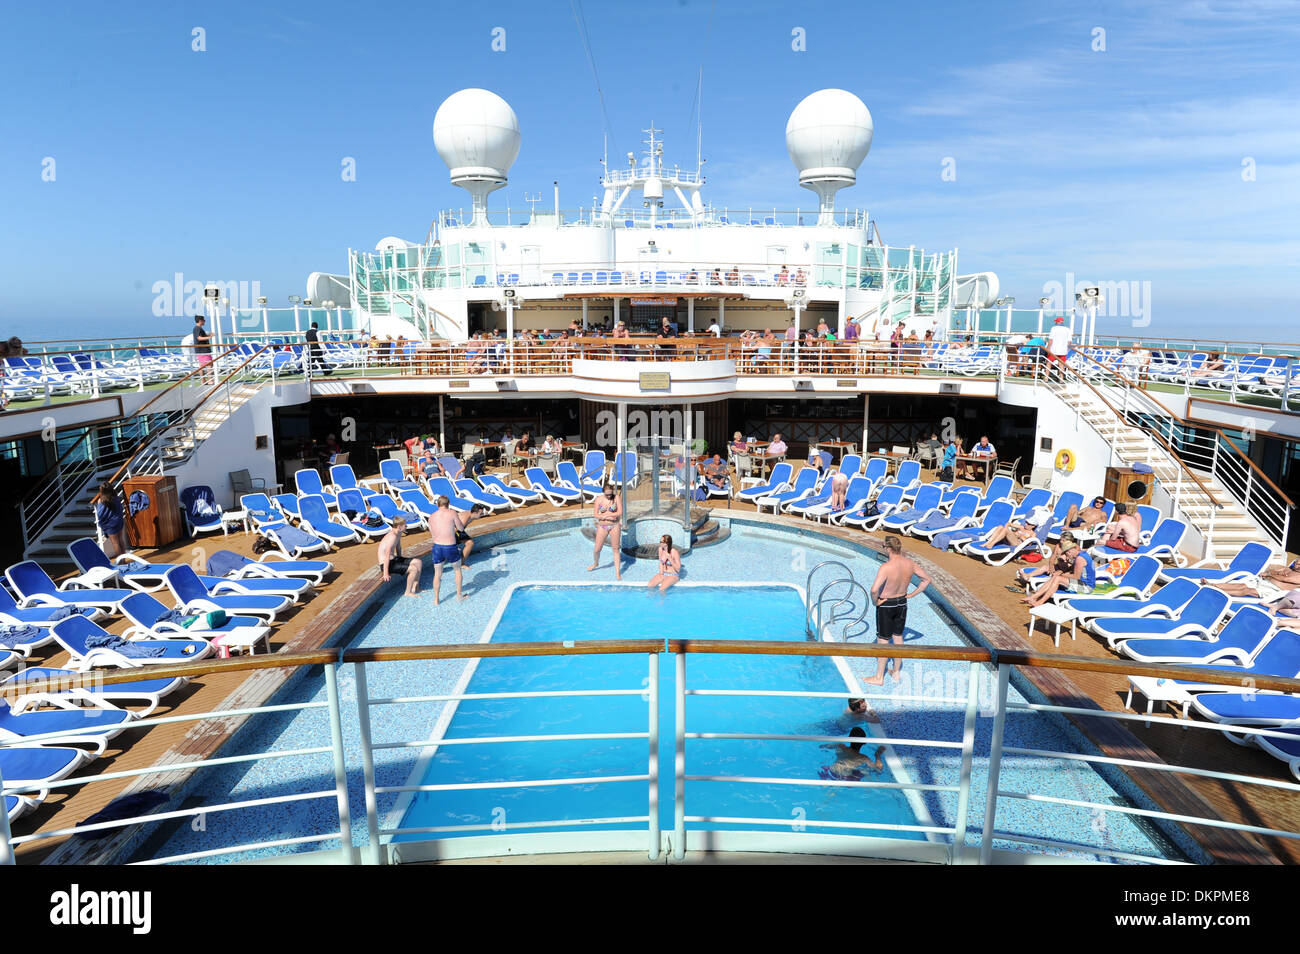 A general view of the middle of the P&O cruise ship Ventura. Pictured is the pool. Stock Photo